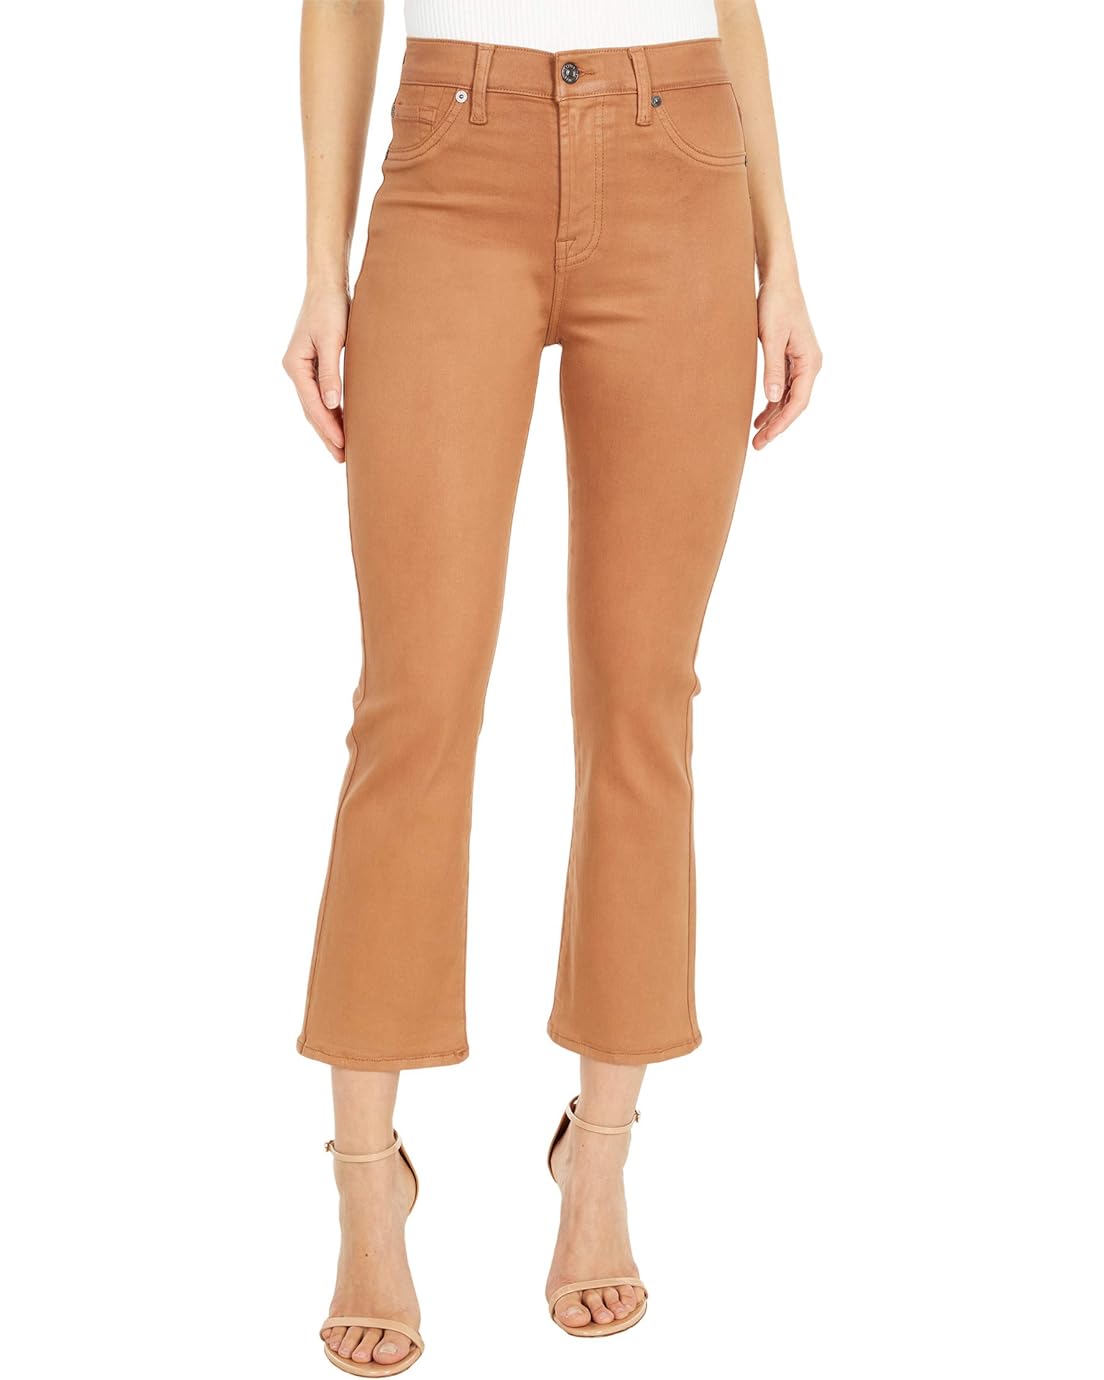 7 For All Mankind The High-Waist Slim Kick in Penny